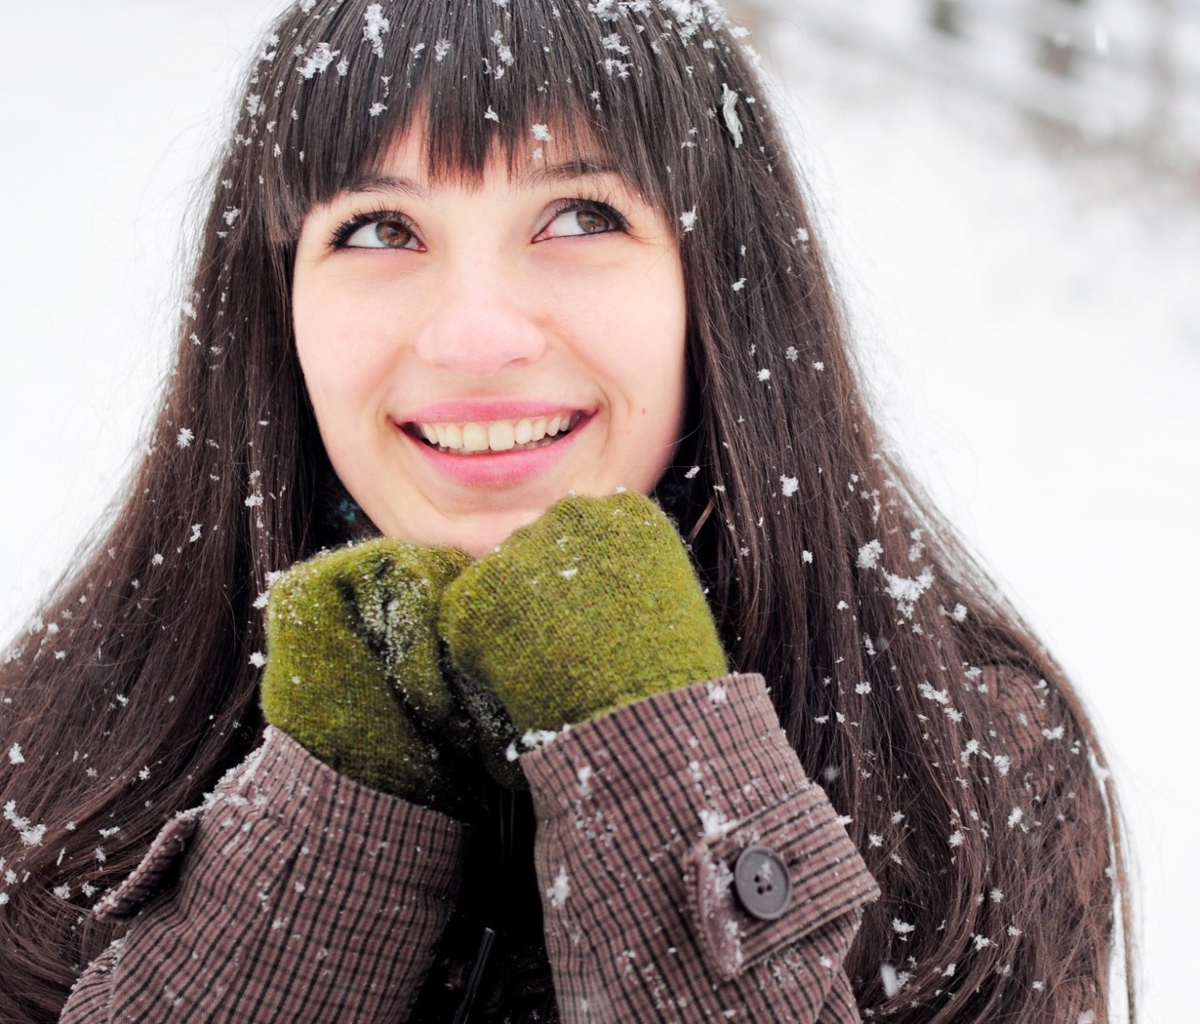 Brunette With Green Gloves In Snow wallpaper 1200x1024